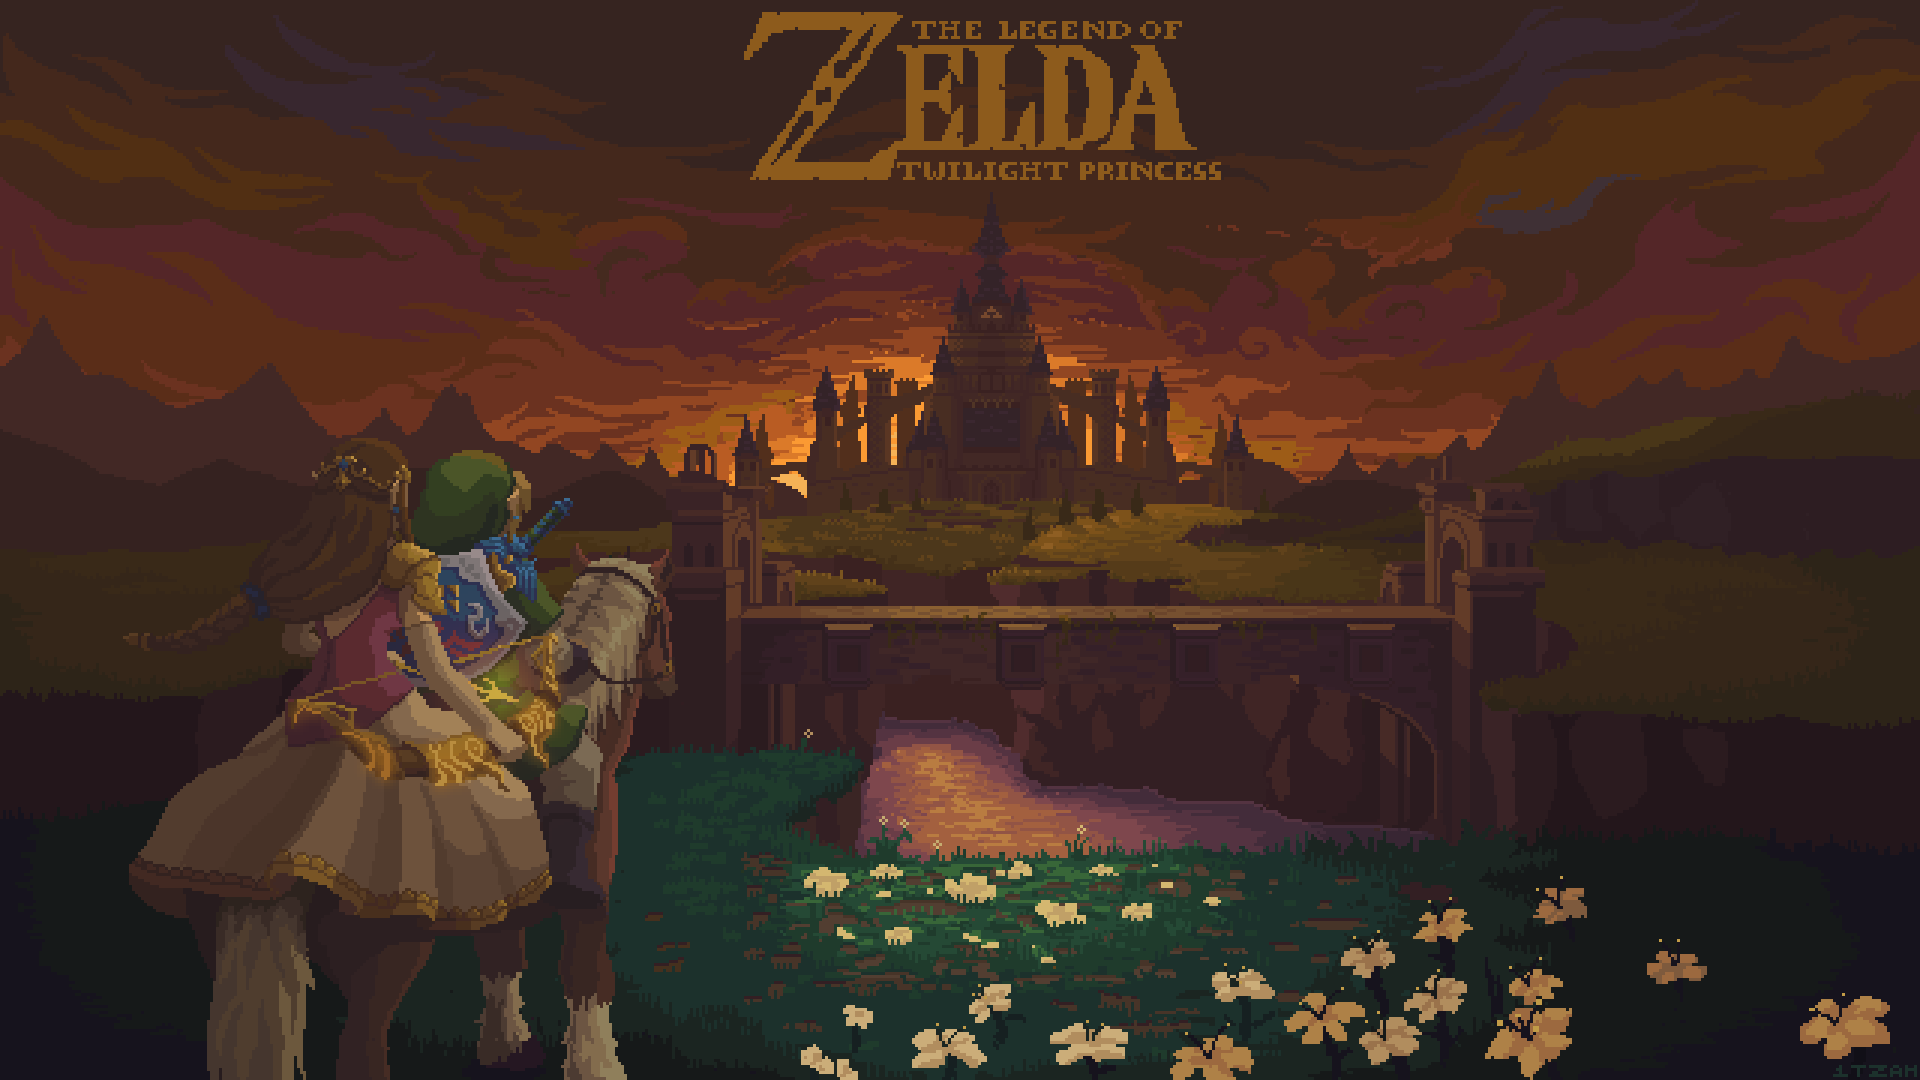 1boy 1girl bow_(weapon) bridge castle clouds cloudy_sky copyright_name english_text epona evening falling_leaves flower from_behind grass highres holding holding_bow_(weapon) holding_weapon horizon horse horseback_riding hylian_shield hyrule_castle itzah leaf link logo male_focus master_sword nature outdoors pixel_art princess_zelda riding scenery shield shield_on_back sky sword sword_on_back the_legend_of_zelda the_legend_of_zelda:_twilight_princess weapon weapon_on_back wind wind_lift